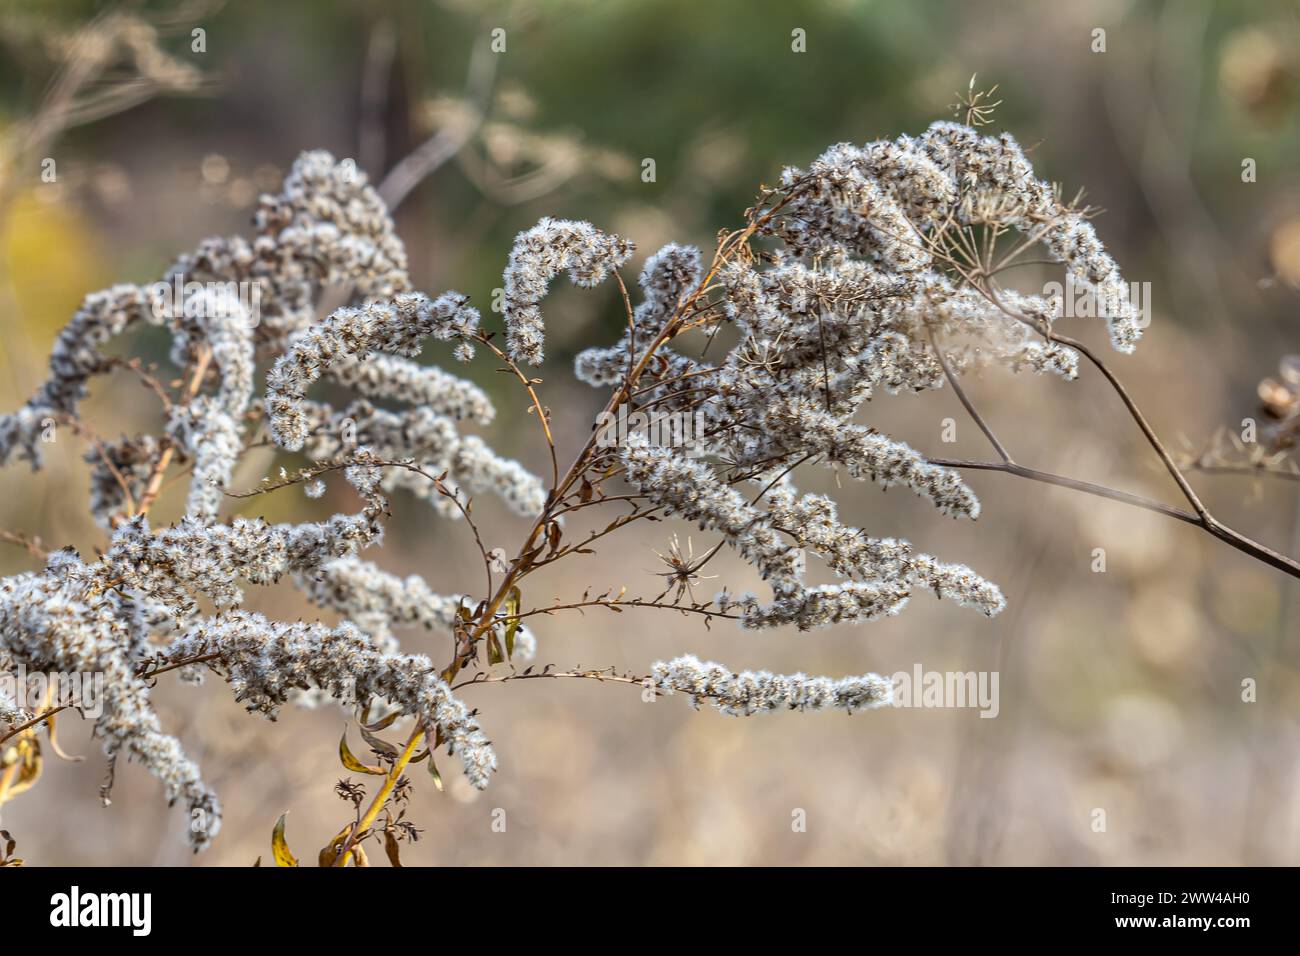 seeds with blow-balls of golden rod - Solidago canadensis wild plant at autumn. Stock Photo